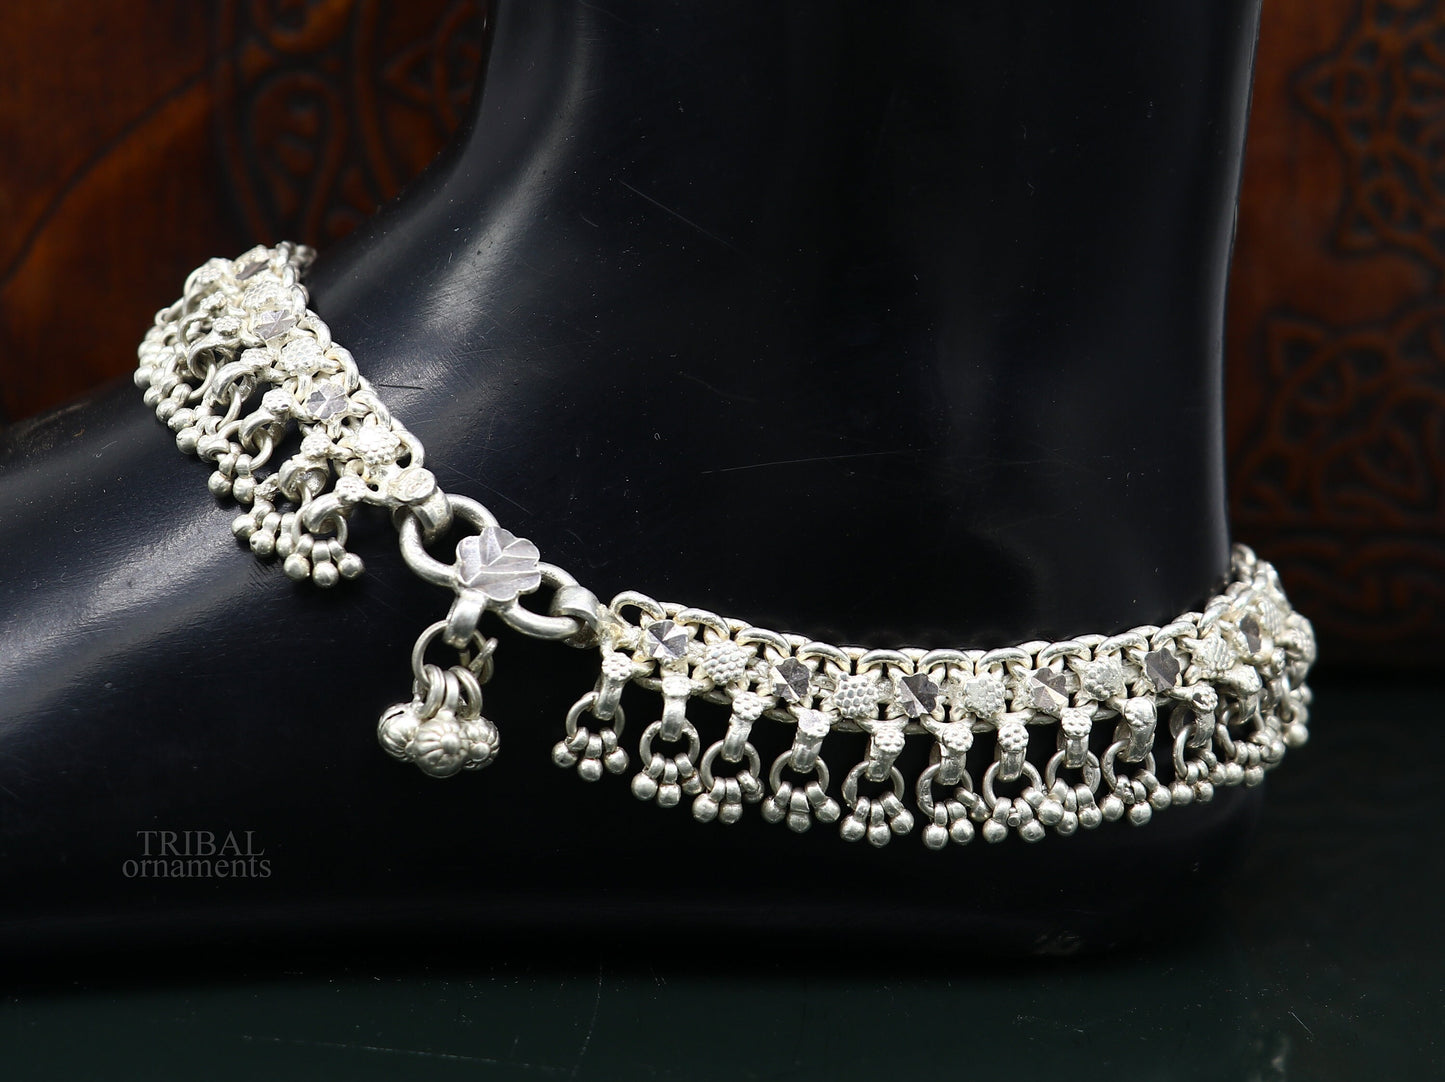 Vintage antique sterling silver handmade anklet belly dance jewelry, excellent ankle bracelet customized tribal brides jewelry ank459 - TRIBAL ORNAMENTS